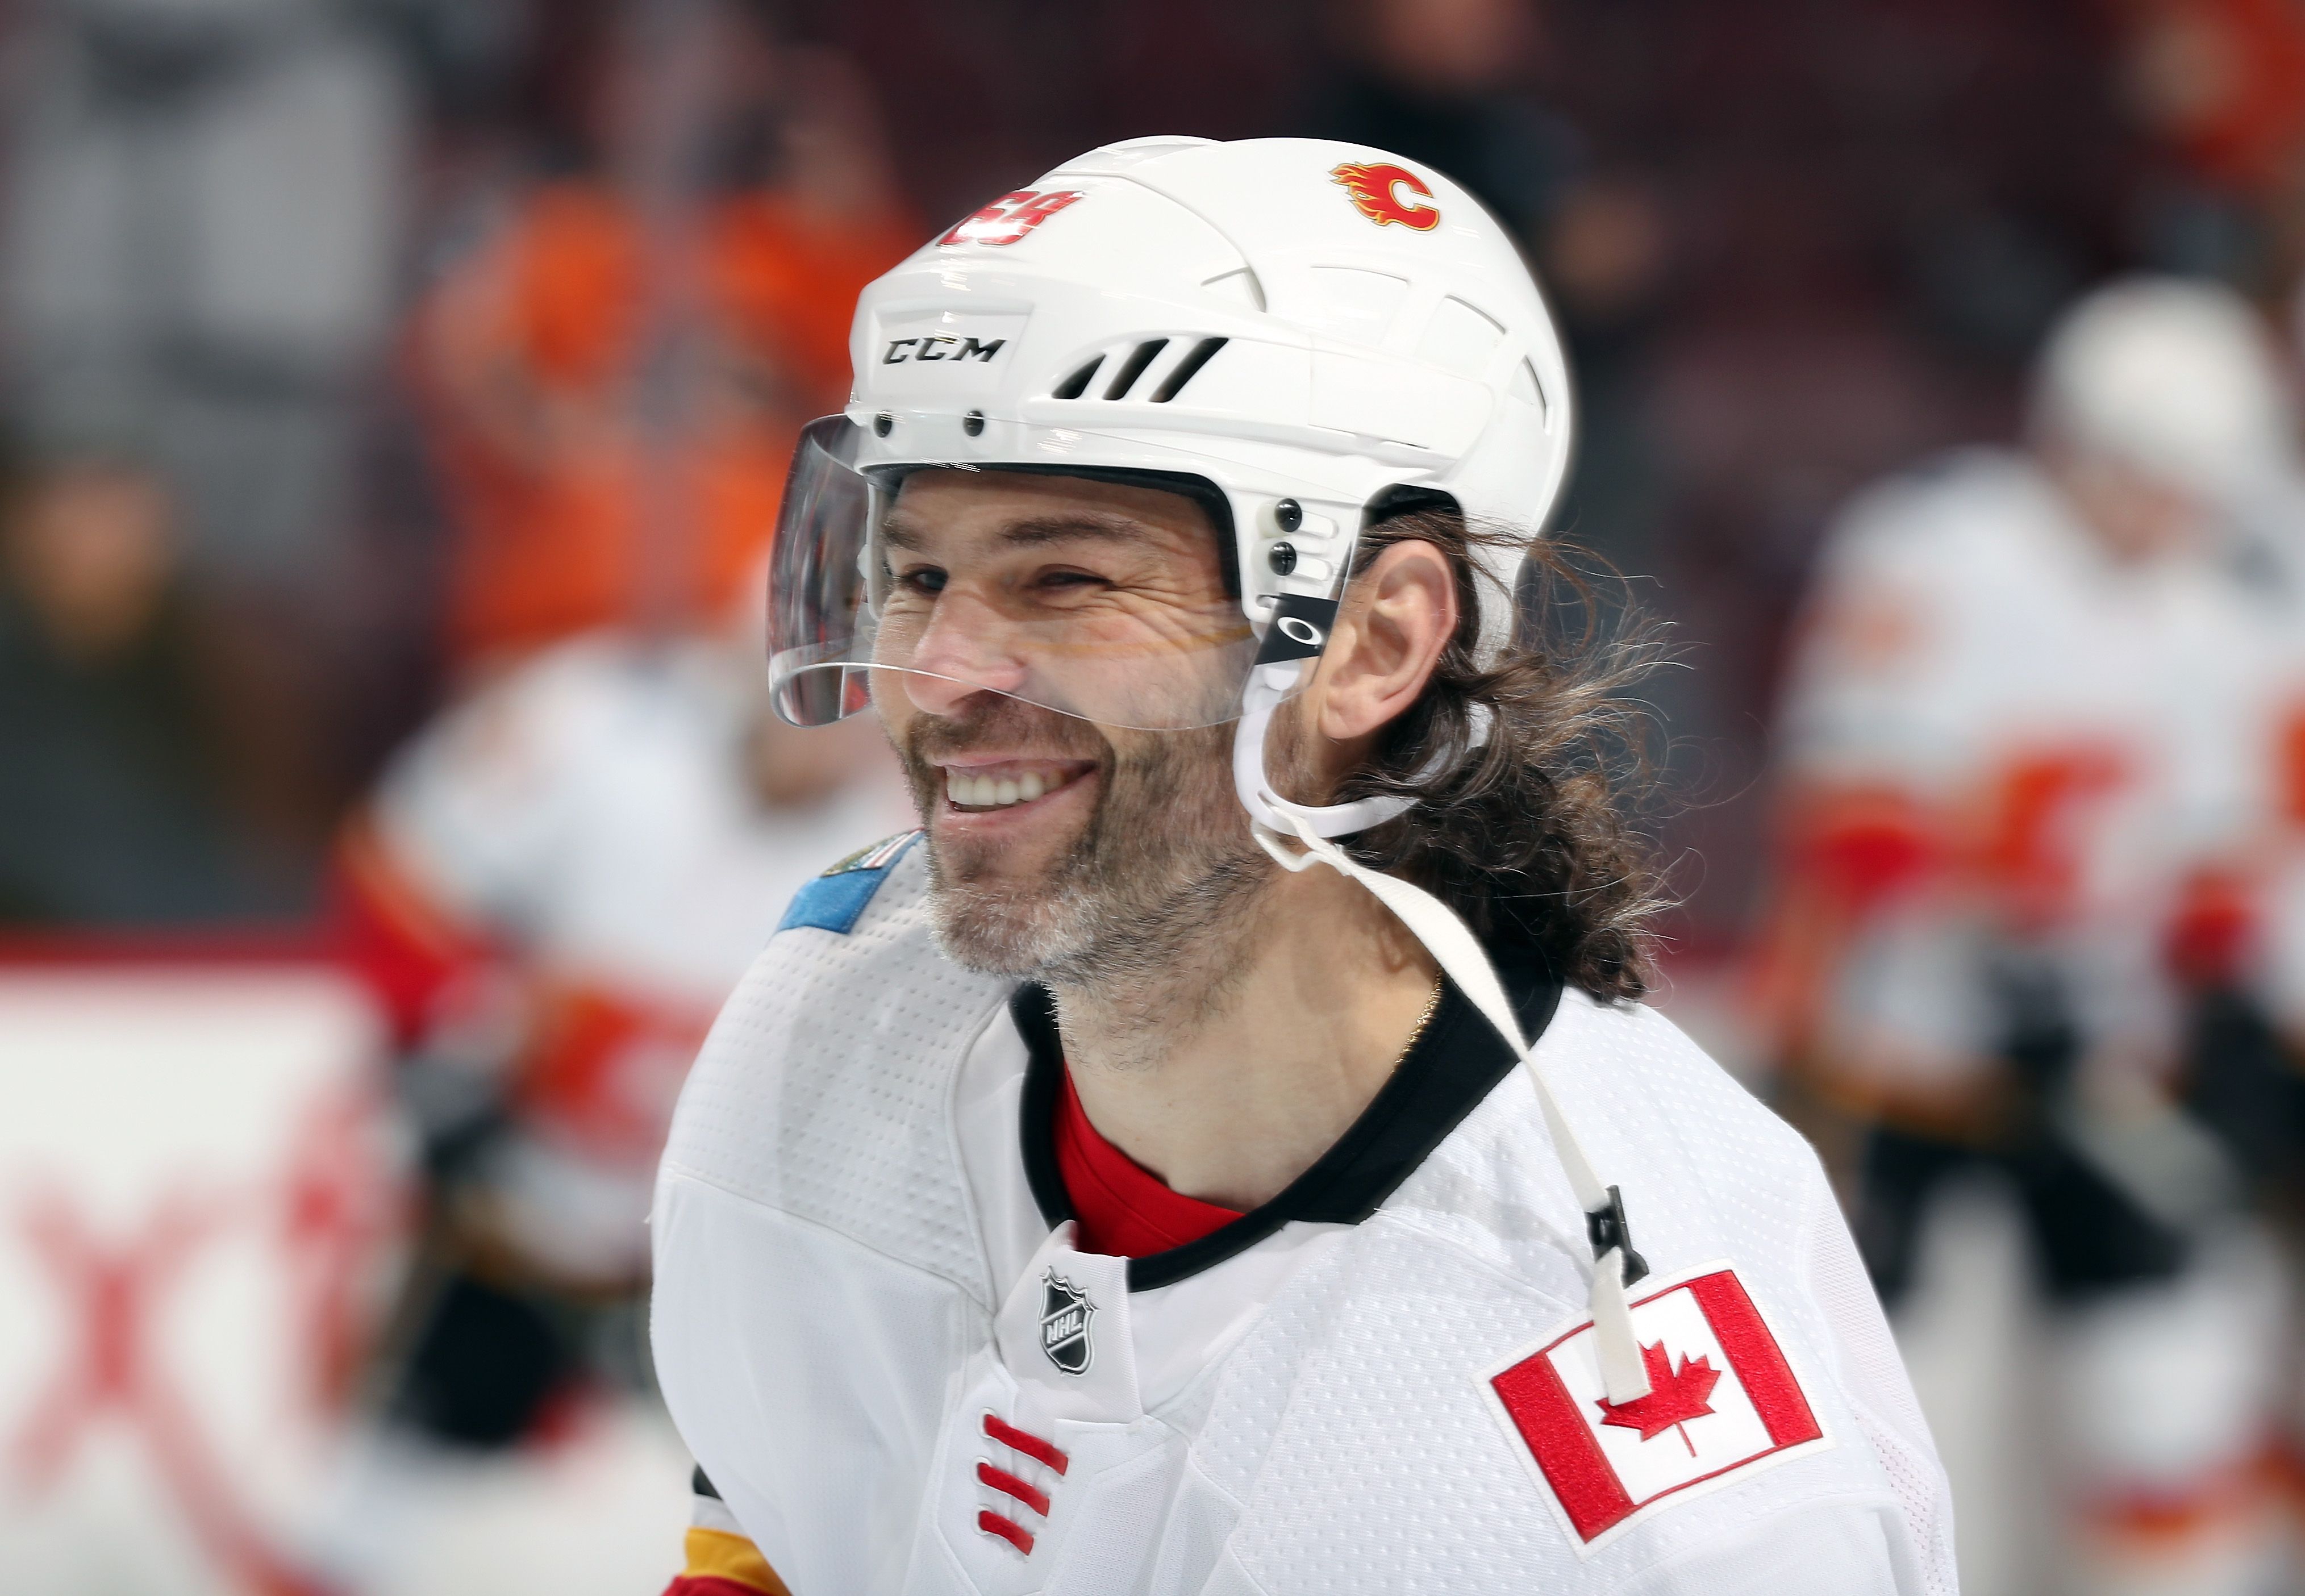 Jaromir Jagr Just Scored 4 Goals in a Czech League Hockey Game at Age 47 image picture